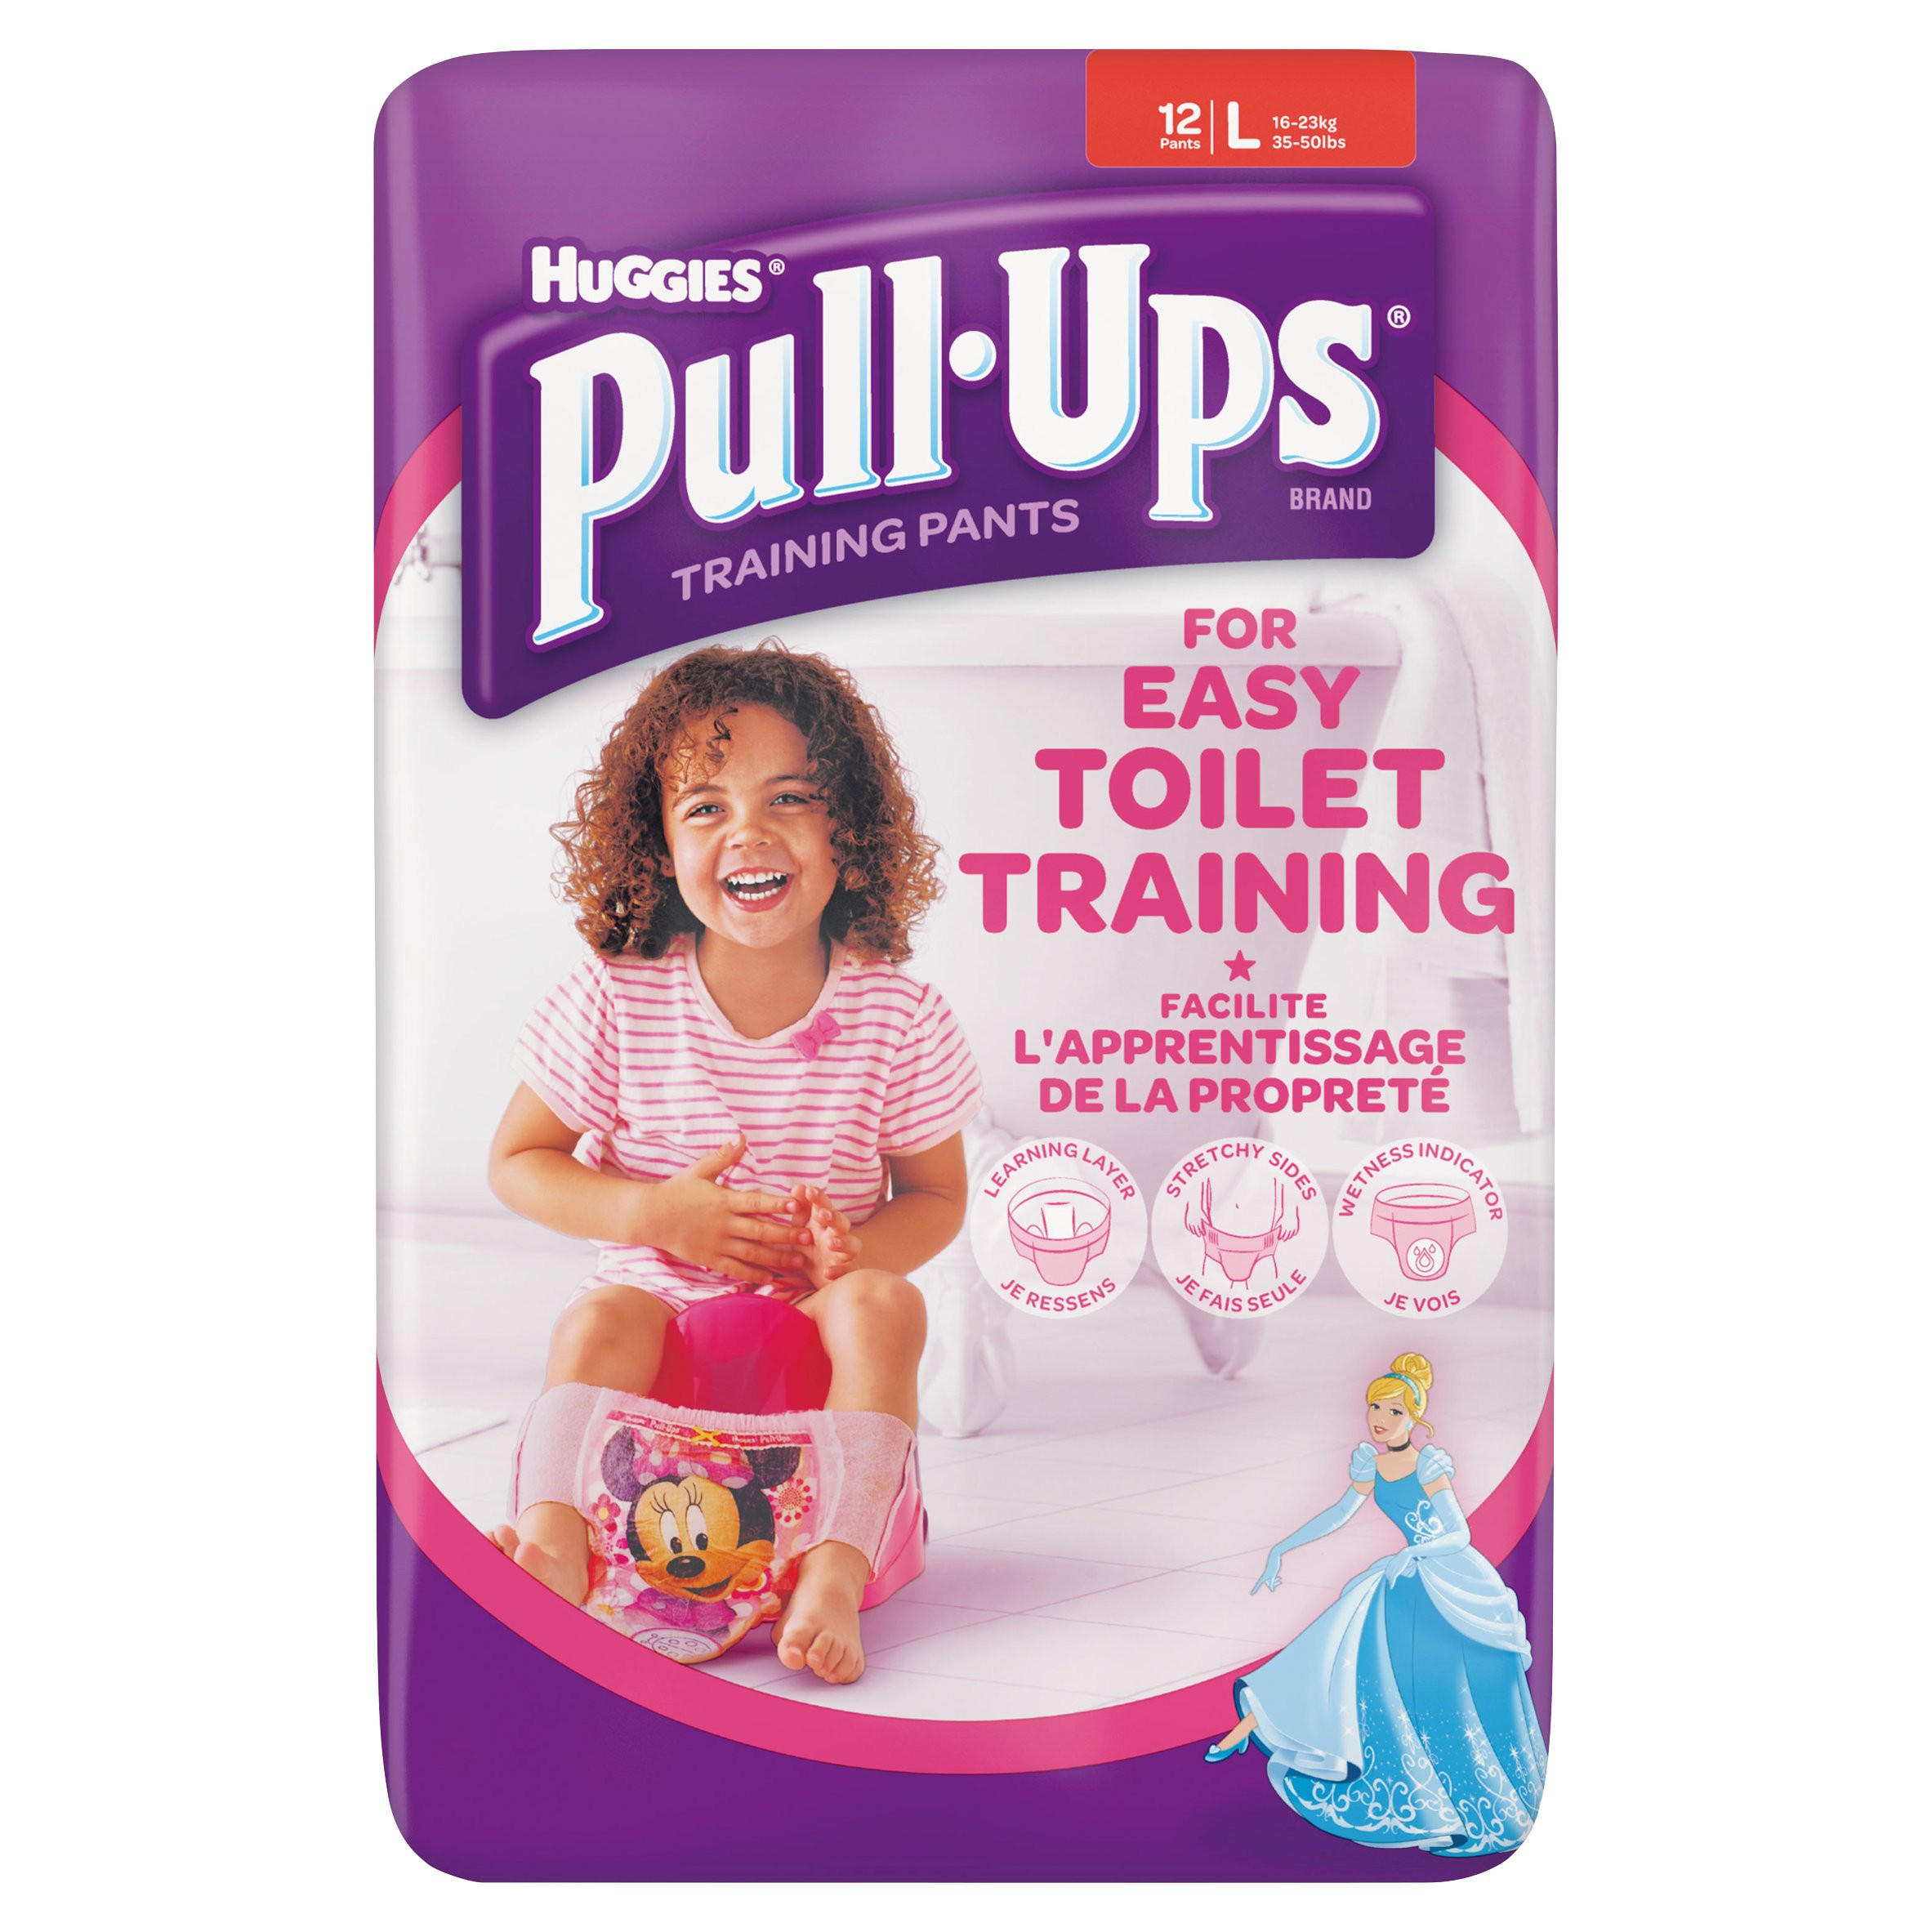 https://assets.iceland.co.uk/i/iceland/huggies_pull_ups_day_time_potty_training_pants_girls_size_large_16_23kg_35_50lbs_6_packs_57566_T1.jpg?$pdpzoom$